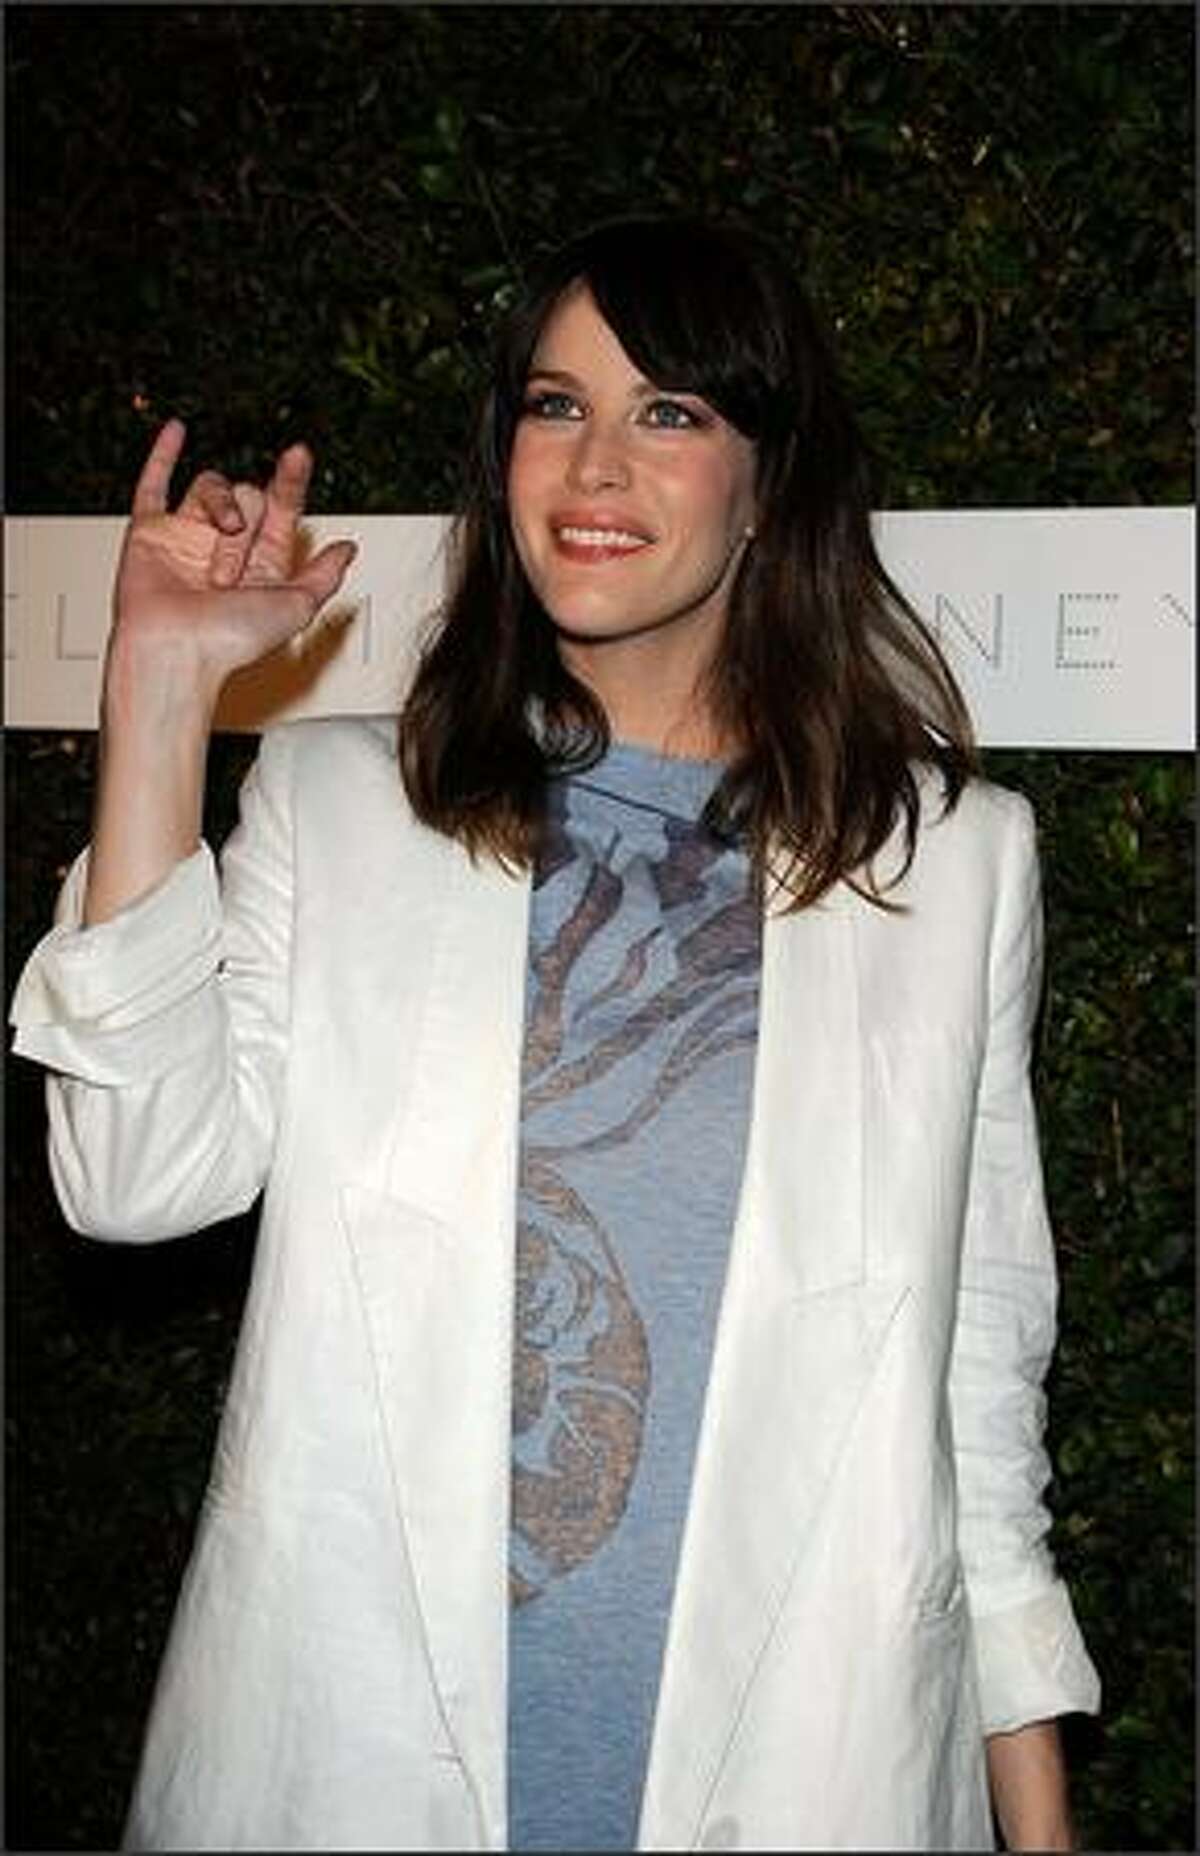 Actress Liv Tyler arrives at a screening of "Home," a new documentary in high definition showing man's impact on the planet, held at Stella McCartney's store in West Hollywood, Calif., on Friday, June 5, 2009.